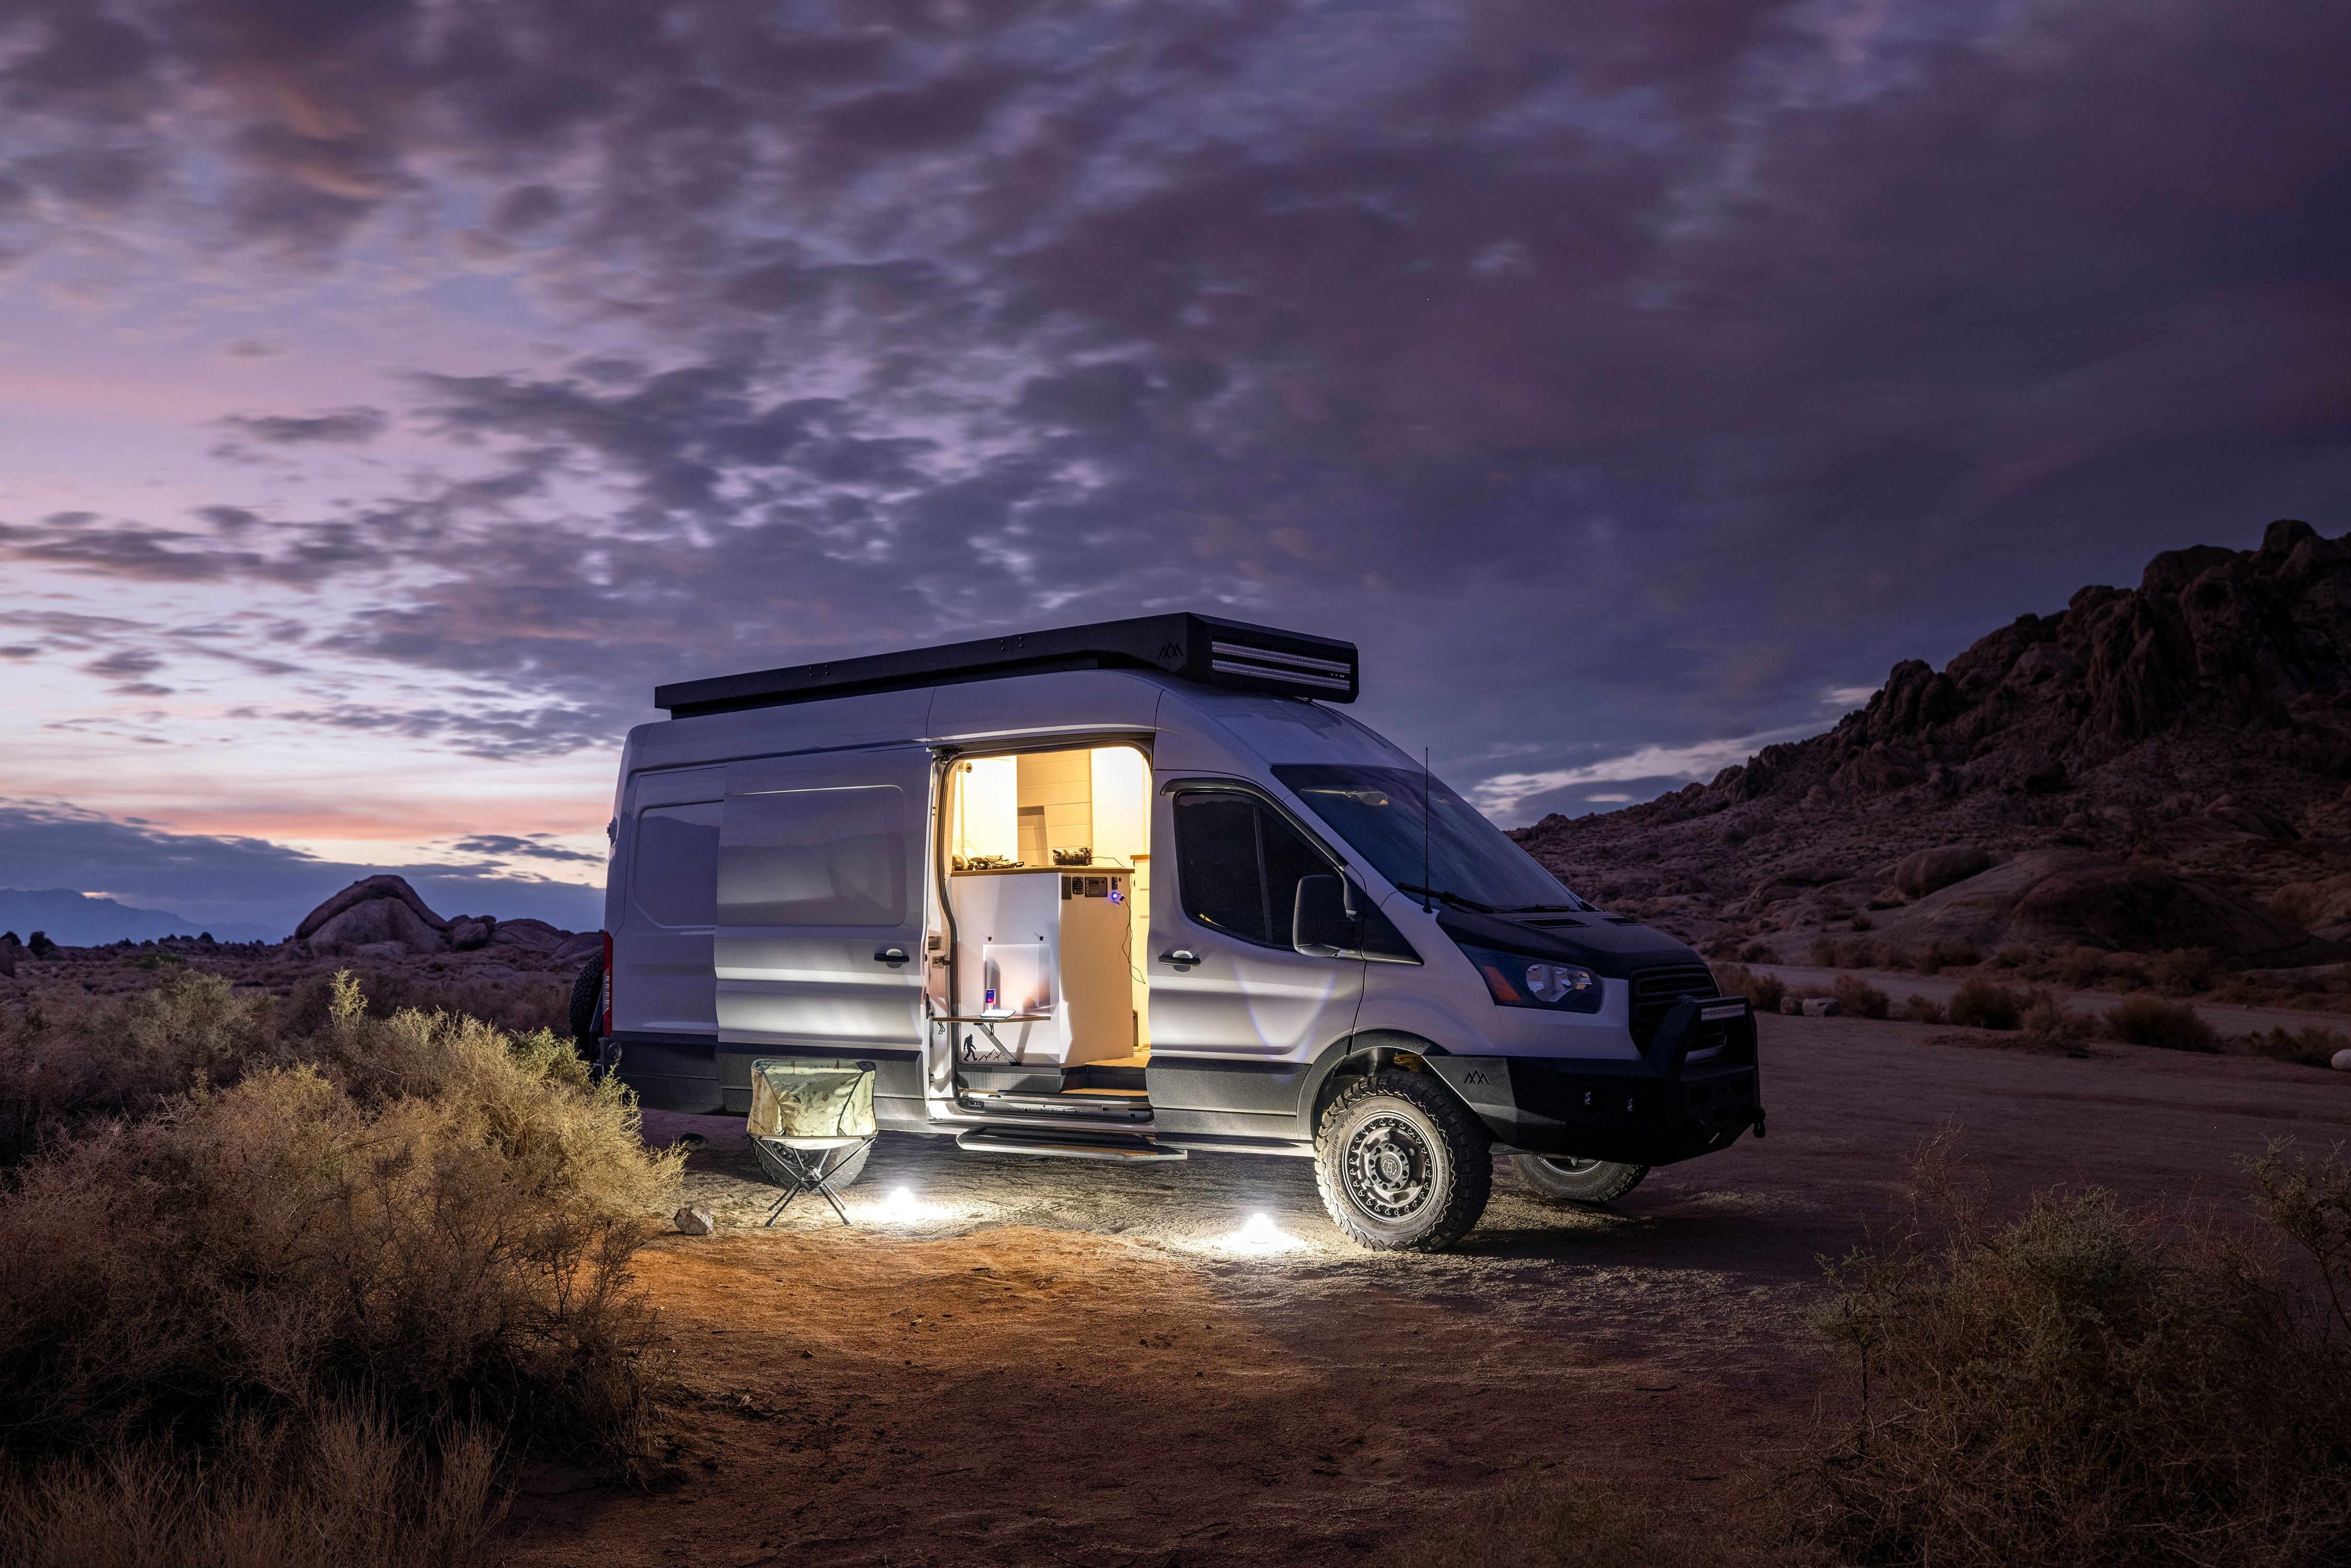 The van life trend, a lifestyle that soared during the pandemic, has declined, with some van outfitters now adjusting their strategies to compete in a crowded marketplace. EDITOR’S NOTE: This is a stock image, undated.